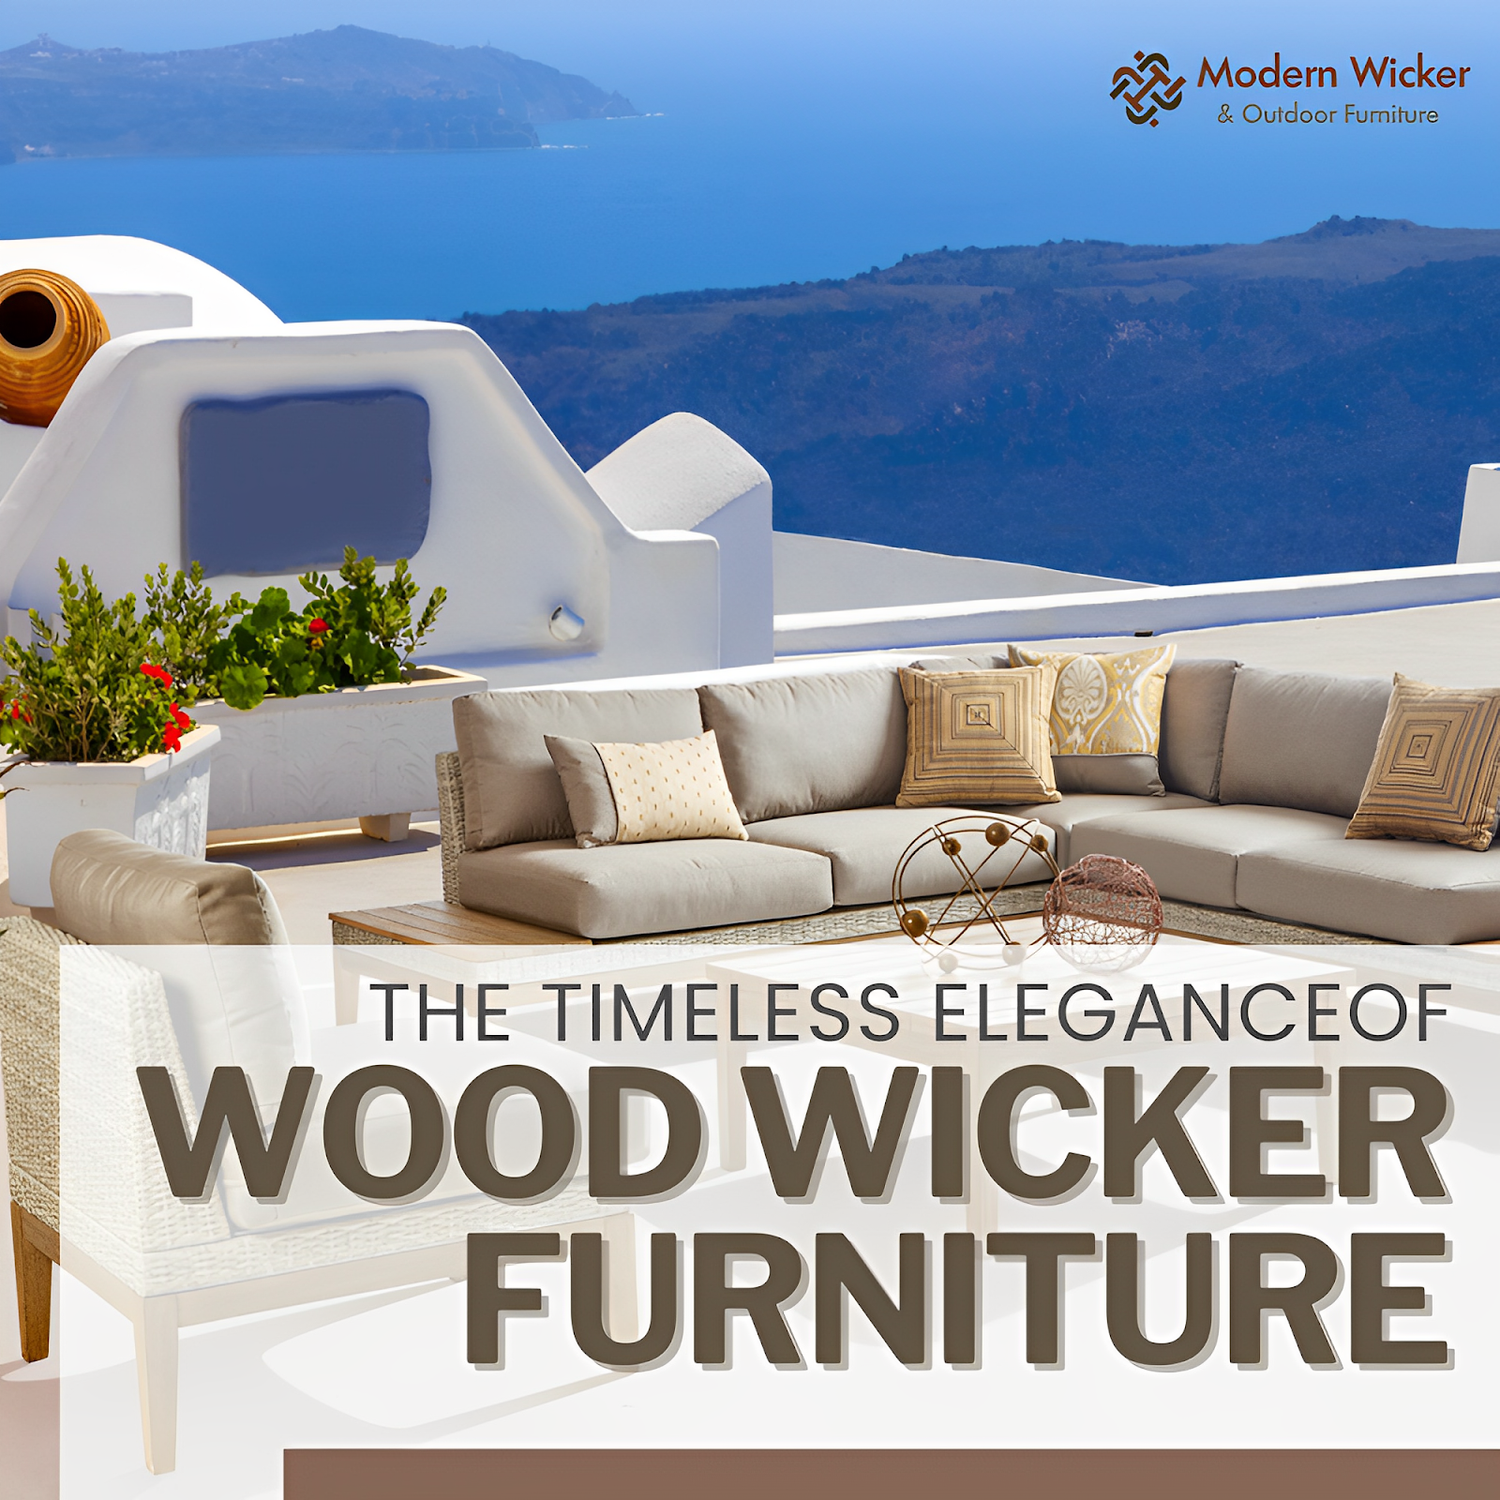 The Timeless Elegance of Wood Wicker Furniture for Your Patio Space